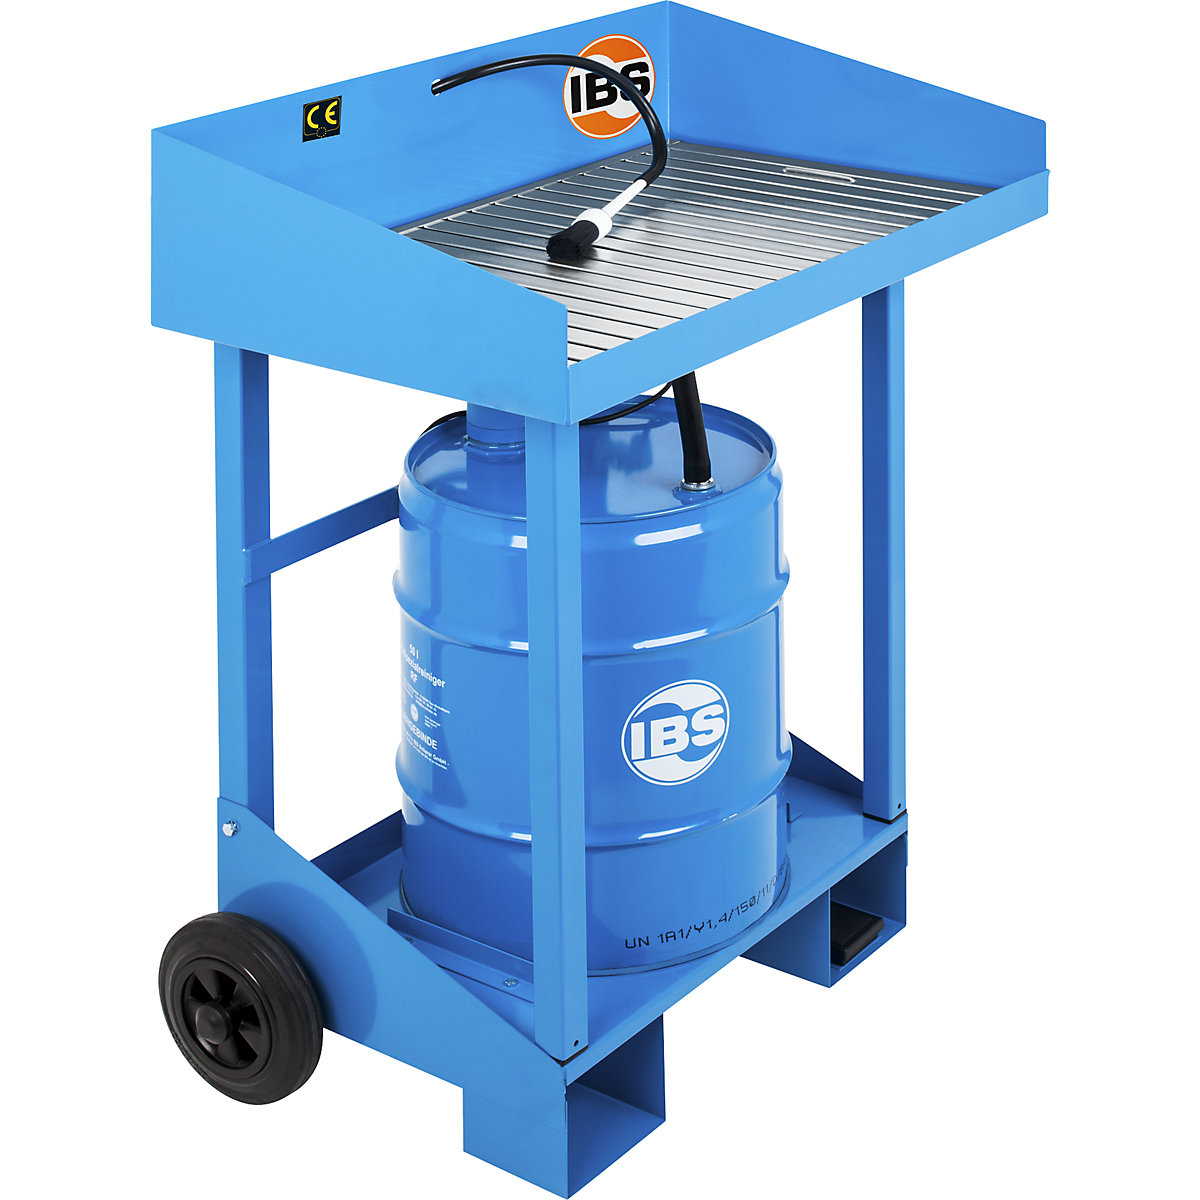 Mobile small parts cleaner – IBS Scherer